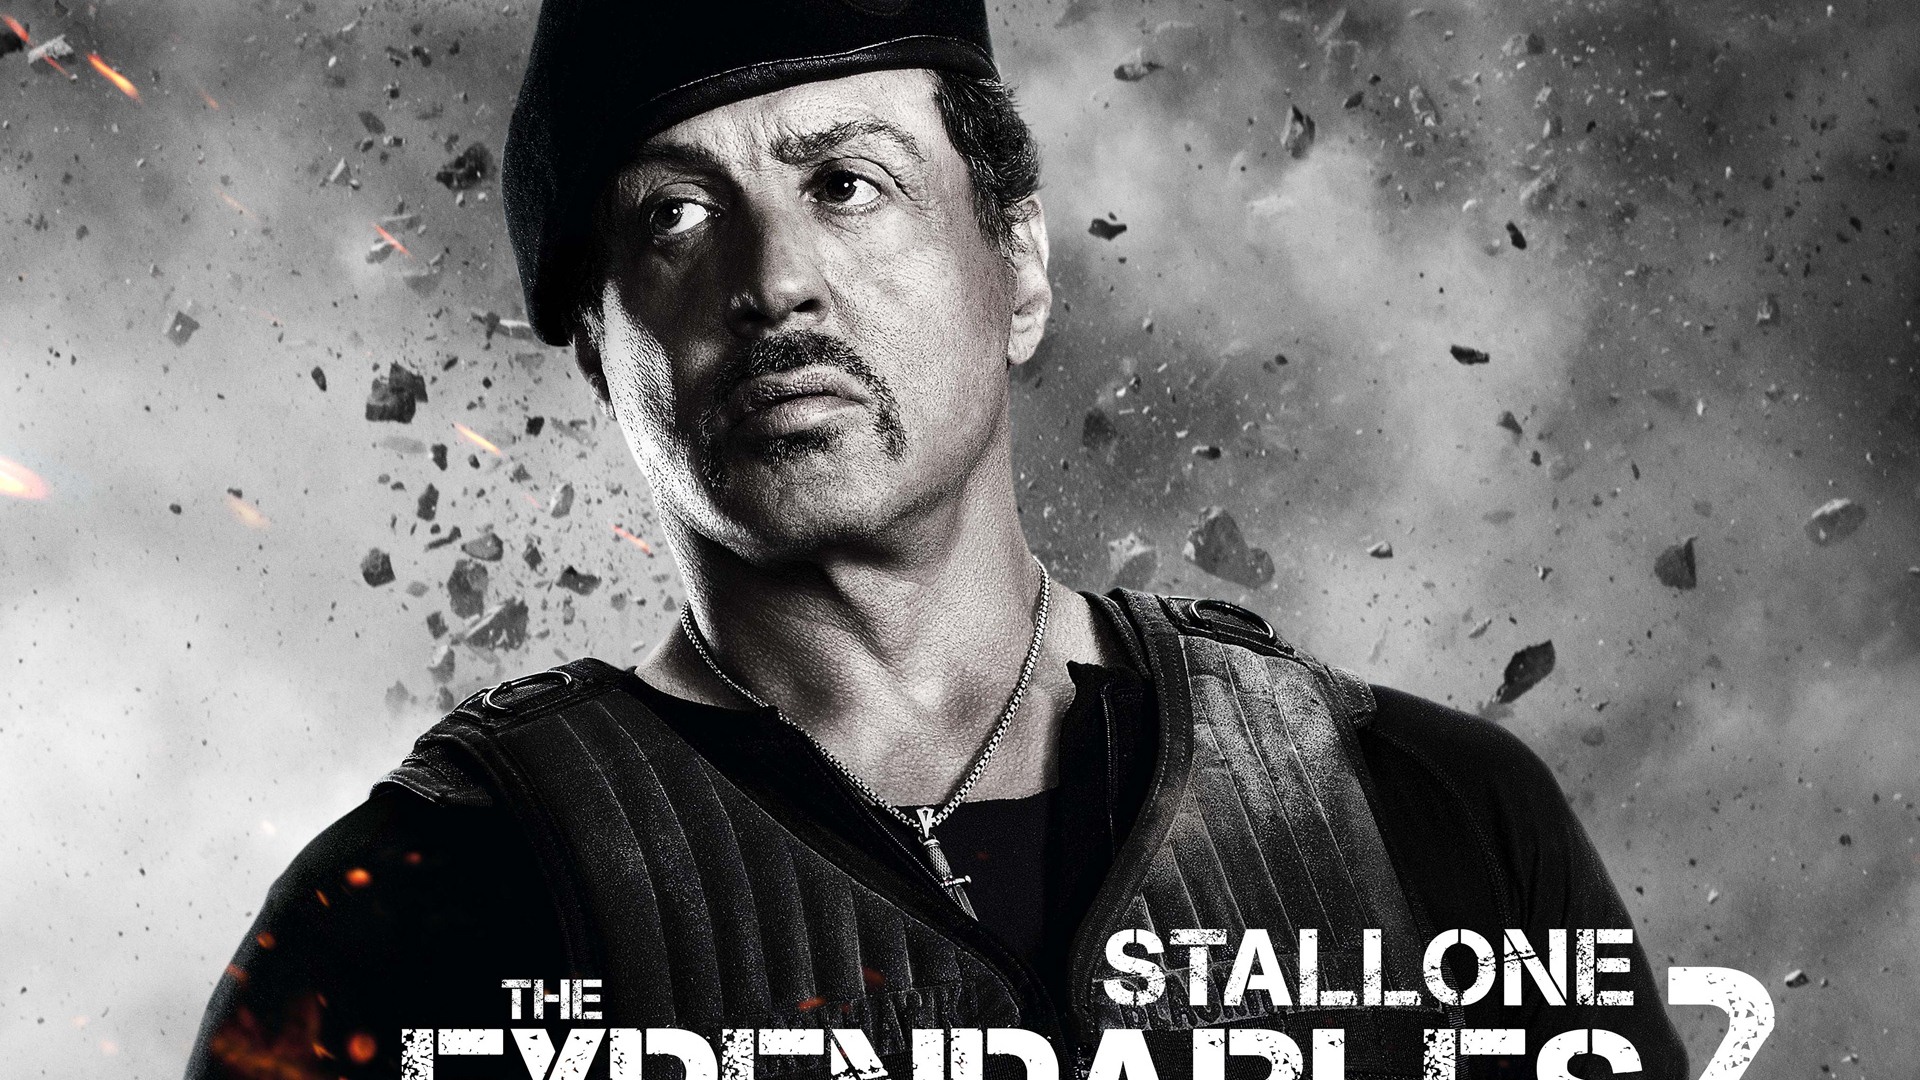 2012 Expendables2 HDの壁紙 #9 - 1920x1080